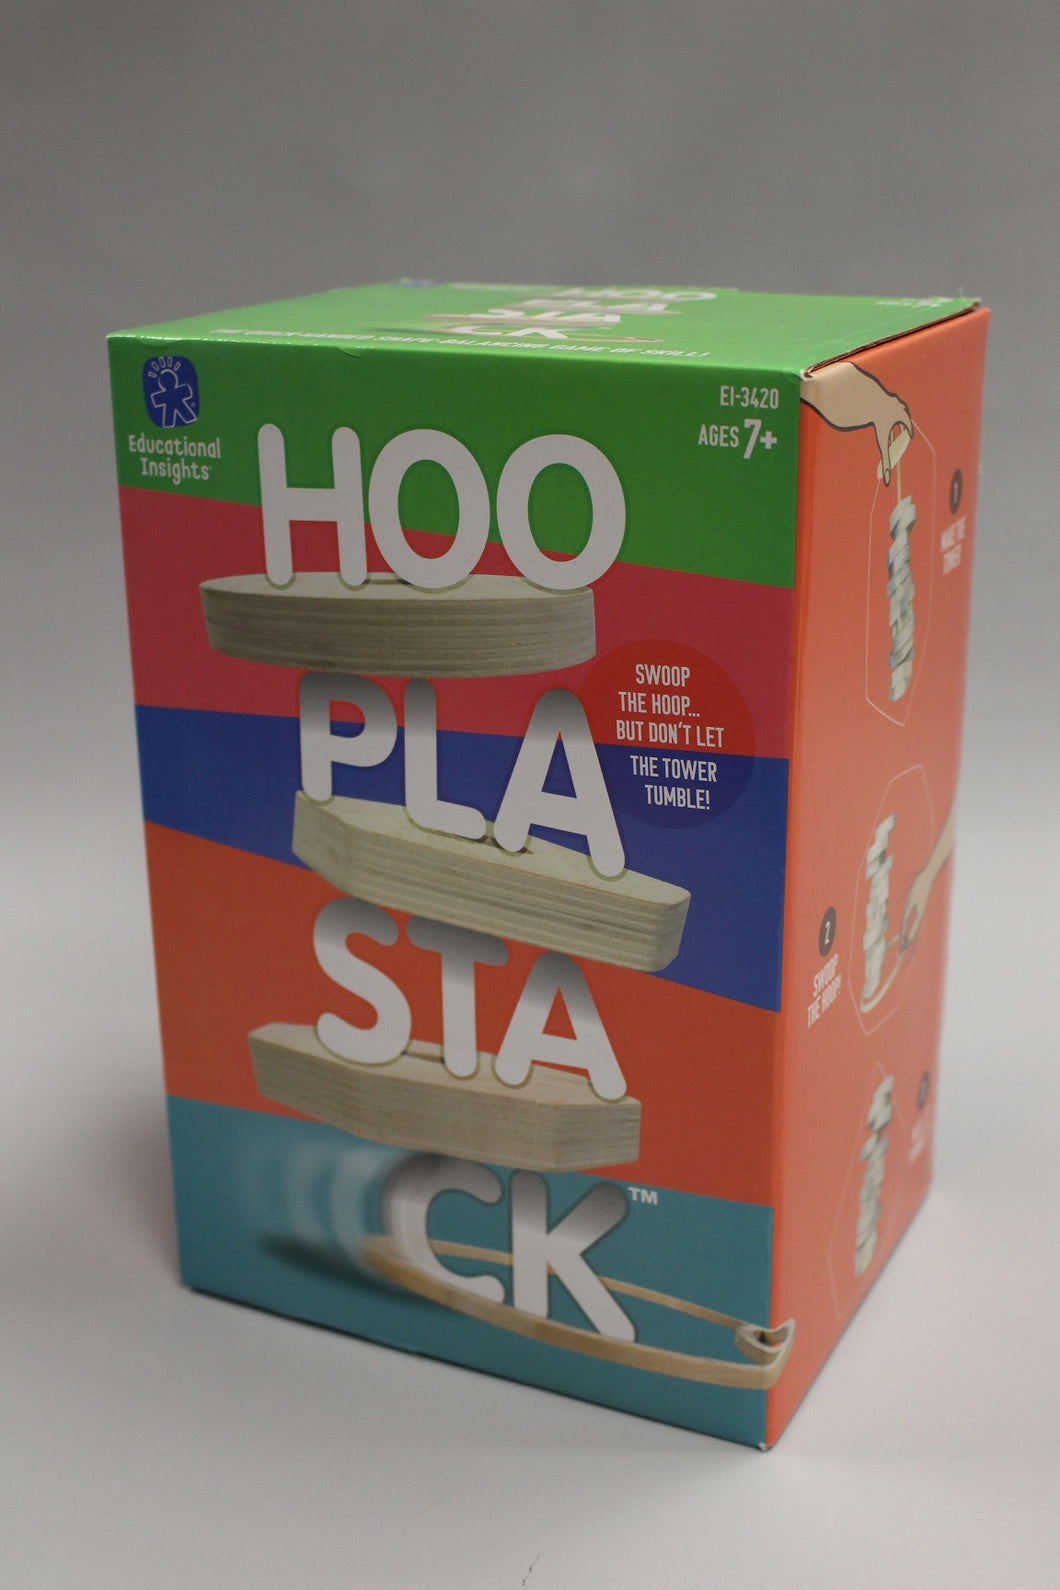 Educational Insights Hooplastack Game, New!